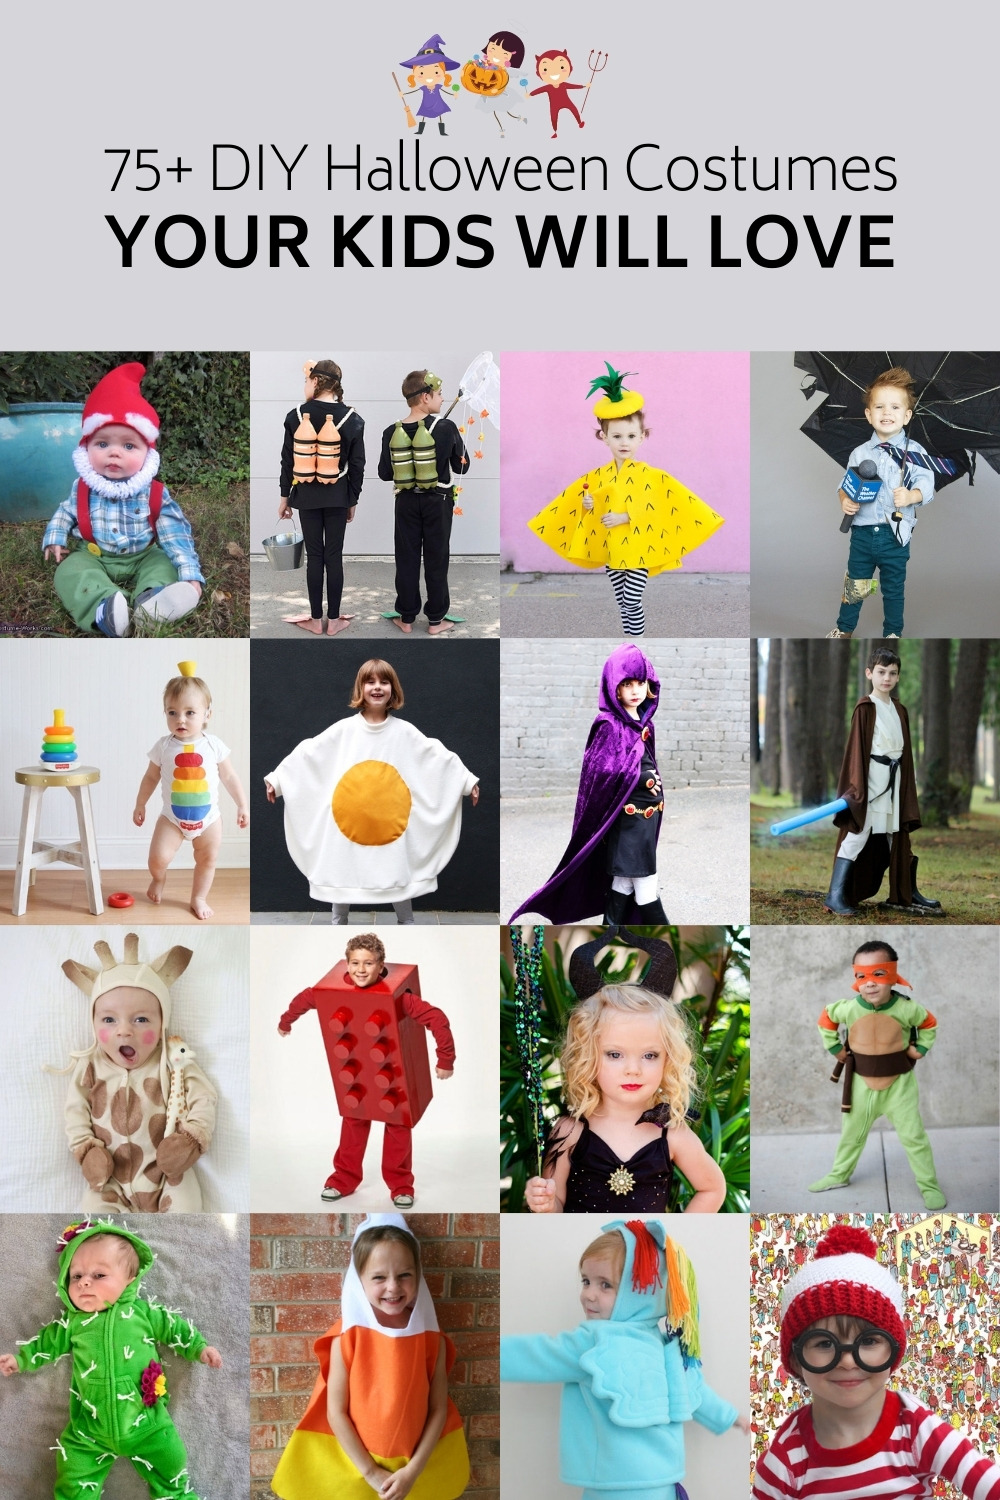 Over 75 DIY Costumes for Kids